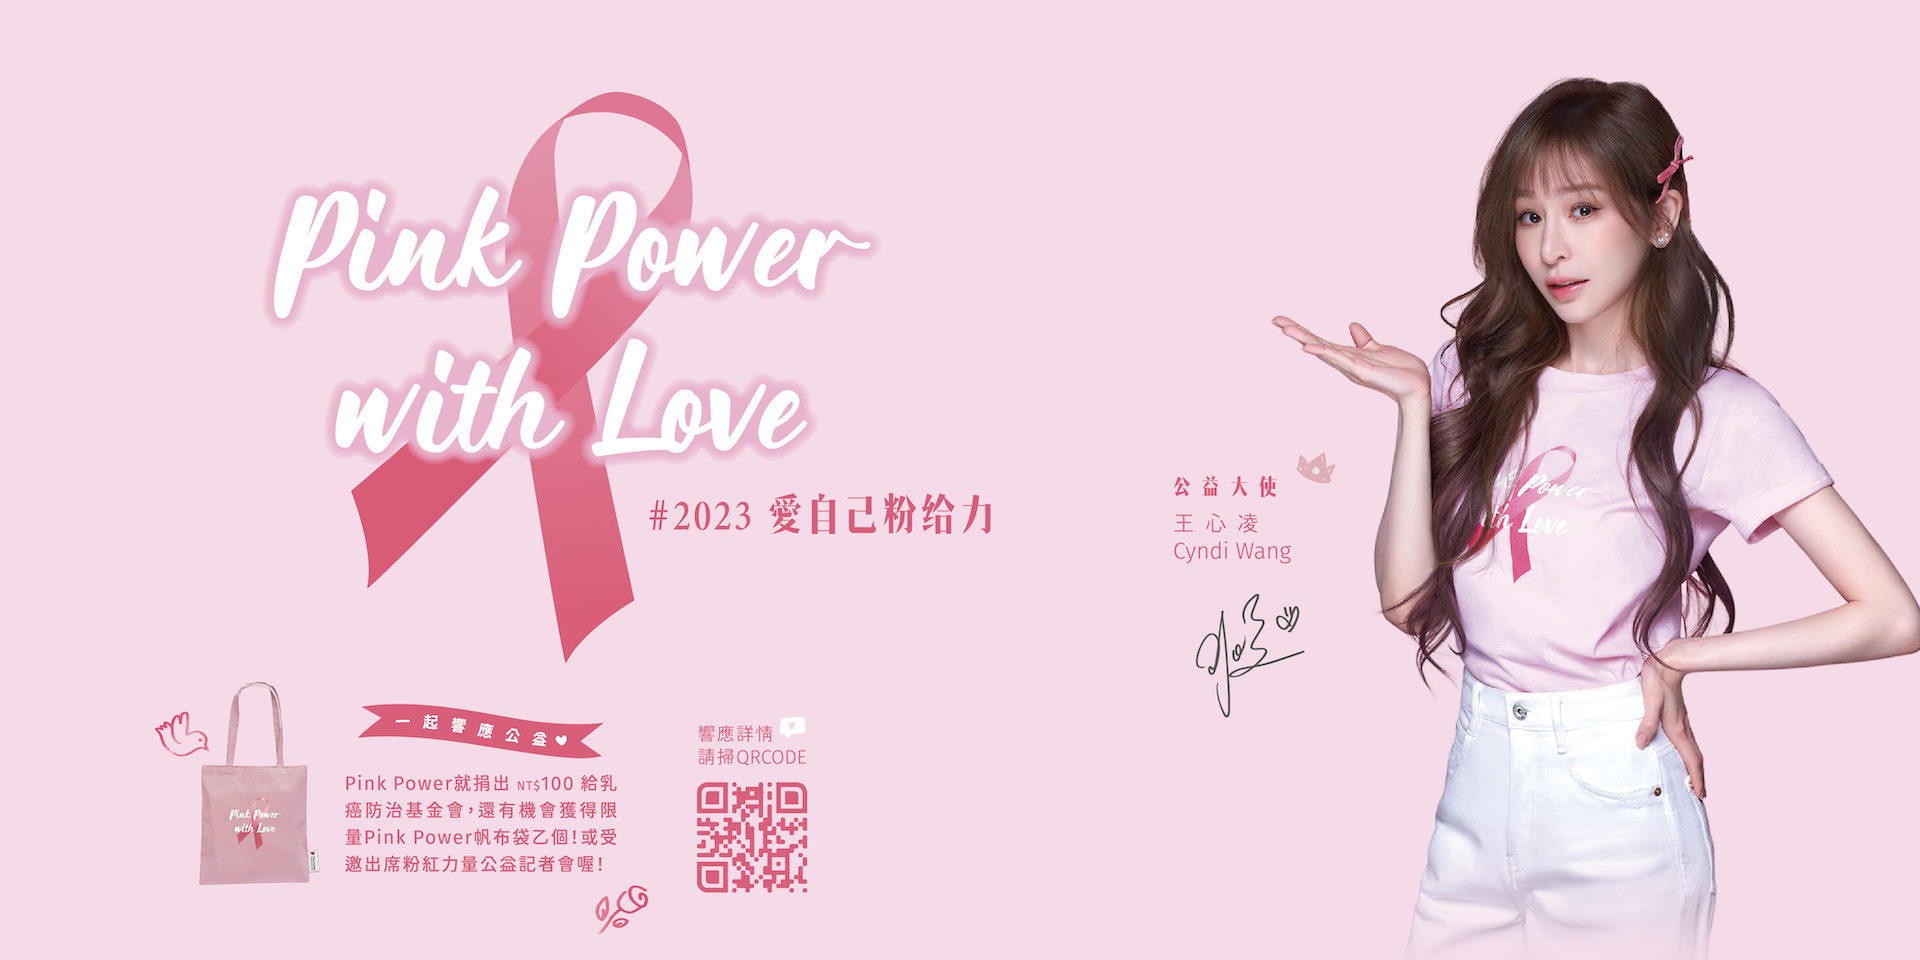 2023 Pink Power with Love 愛自己粉給力